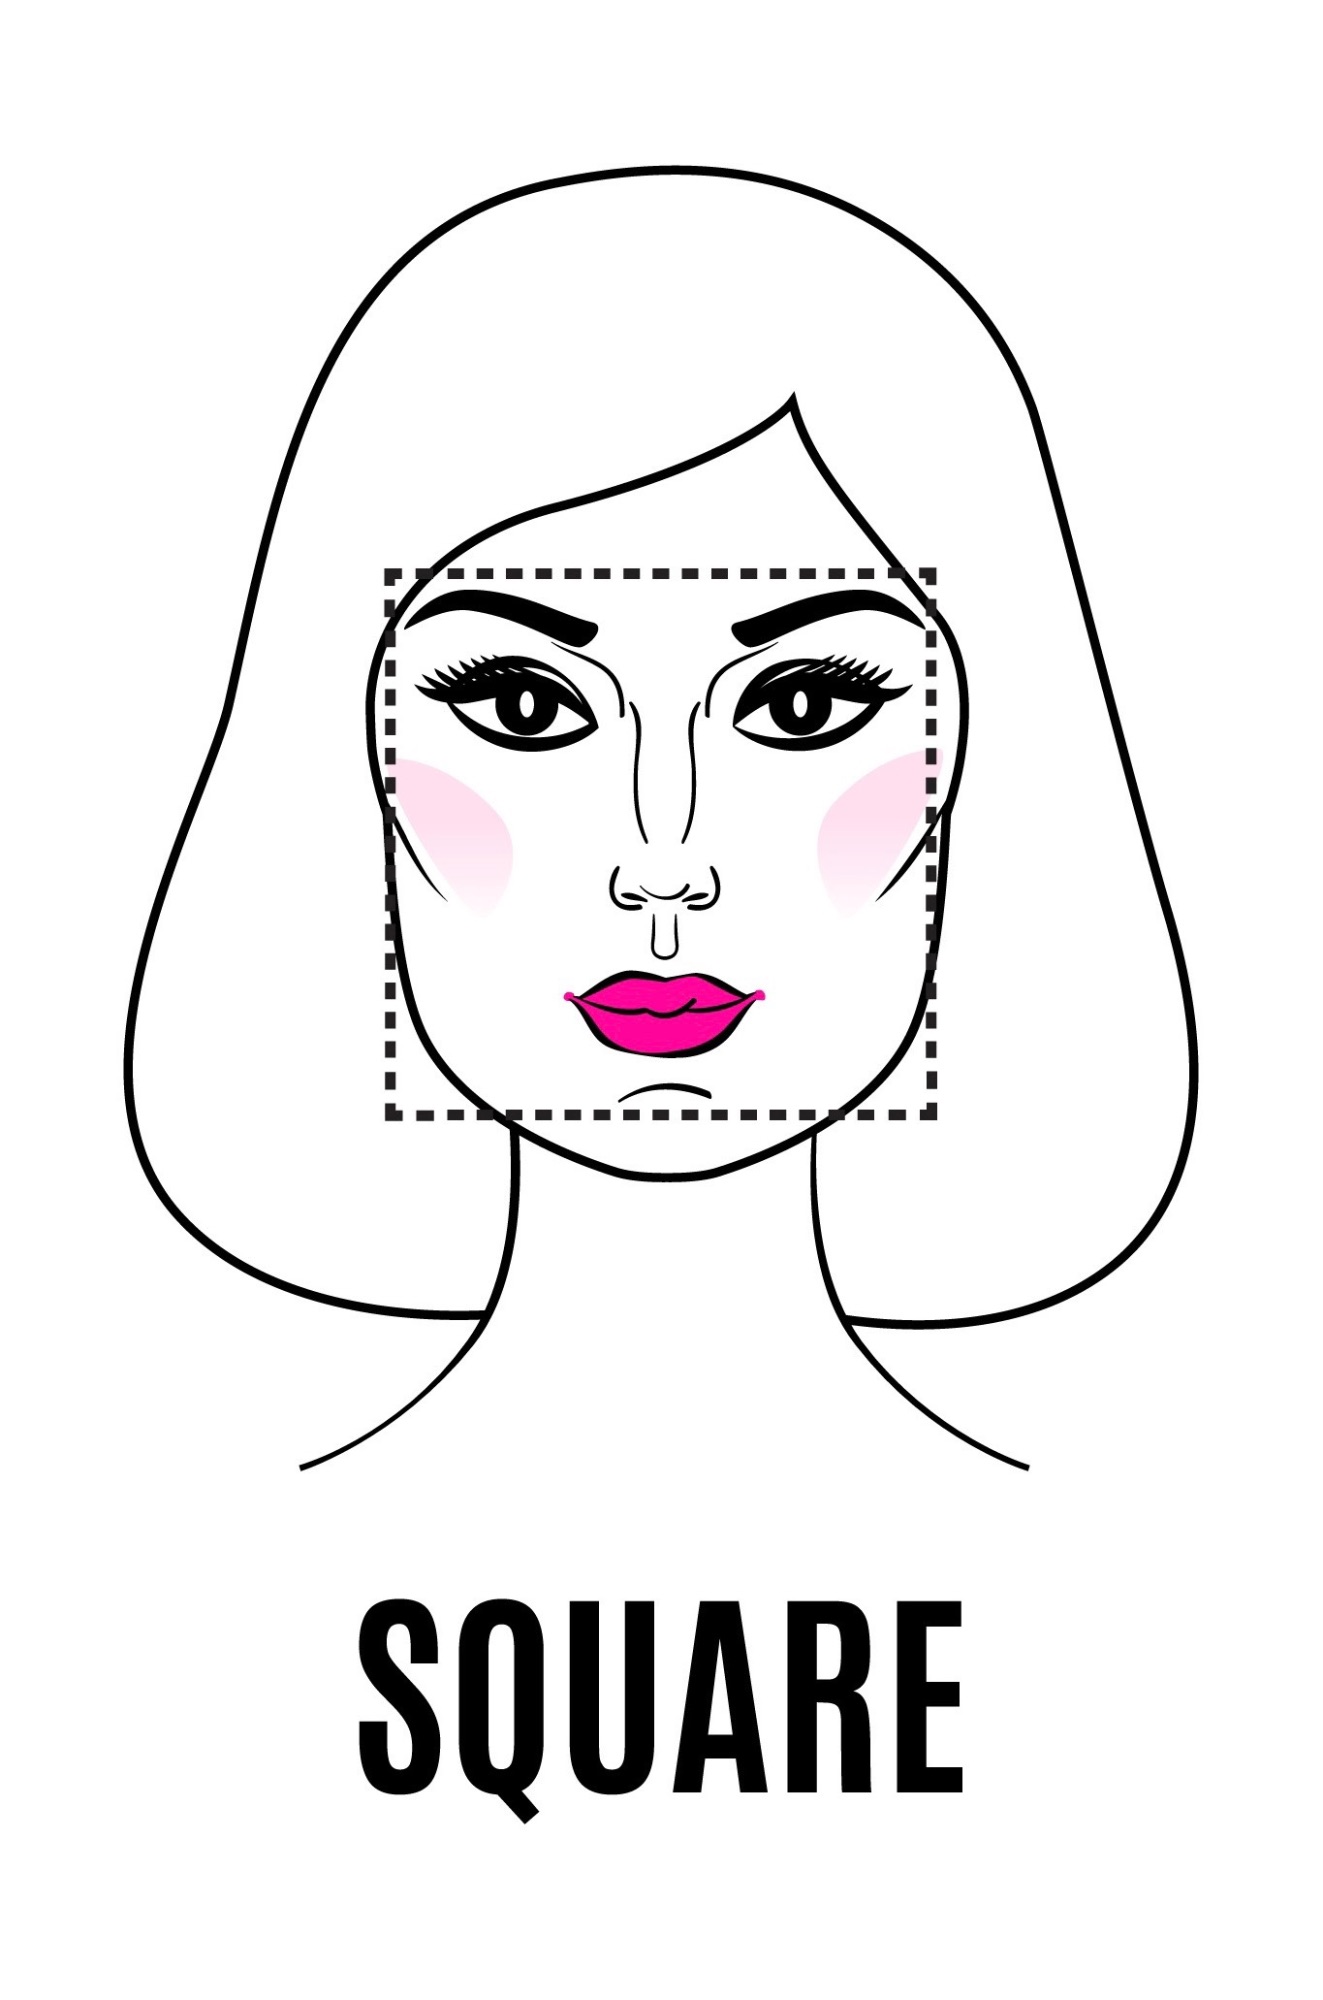 Drawing of a square shaped face